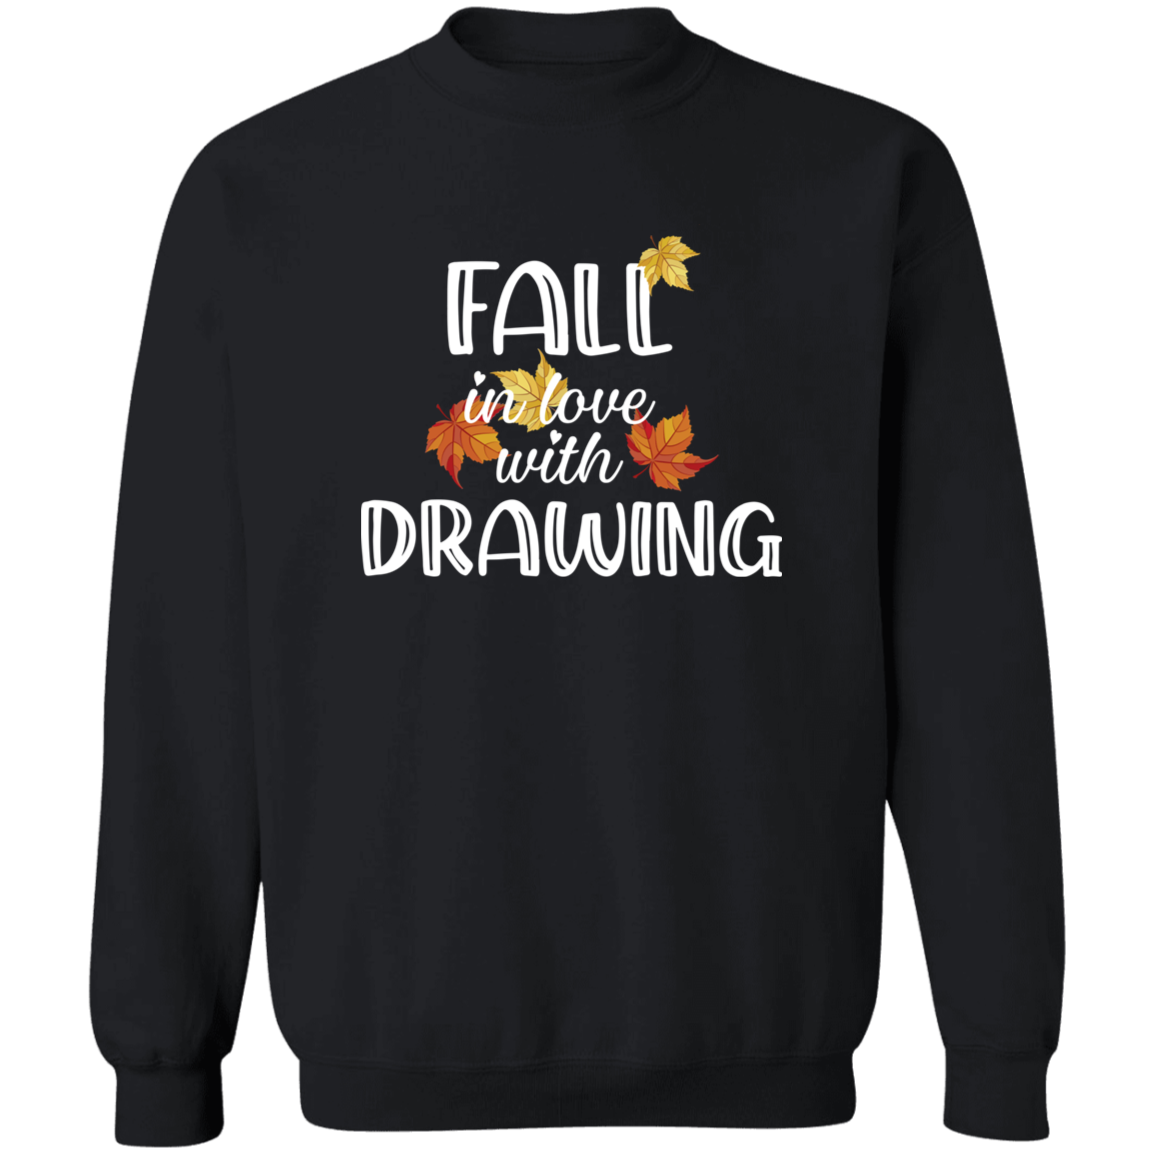 Fall in love with Drawing Sweatshirt